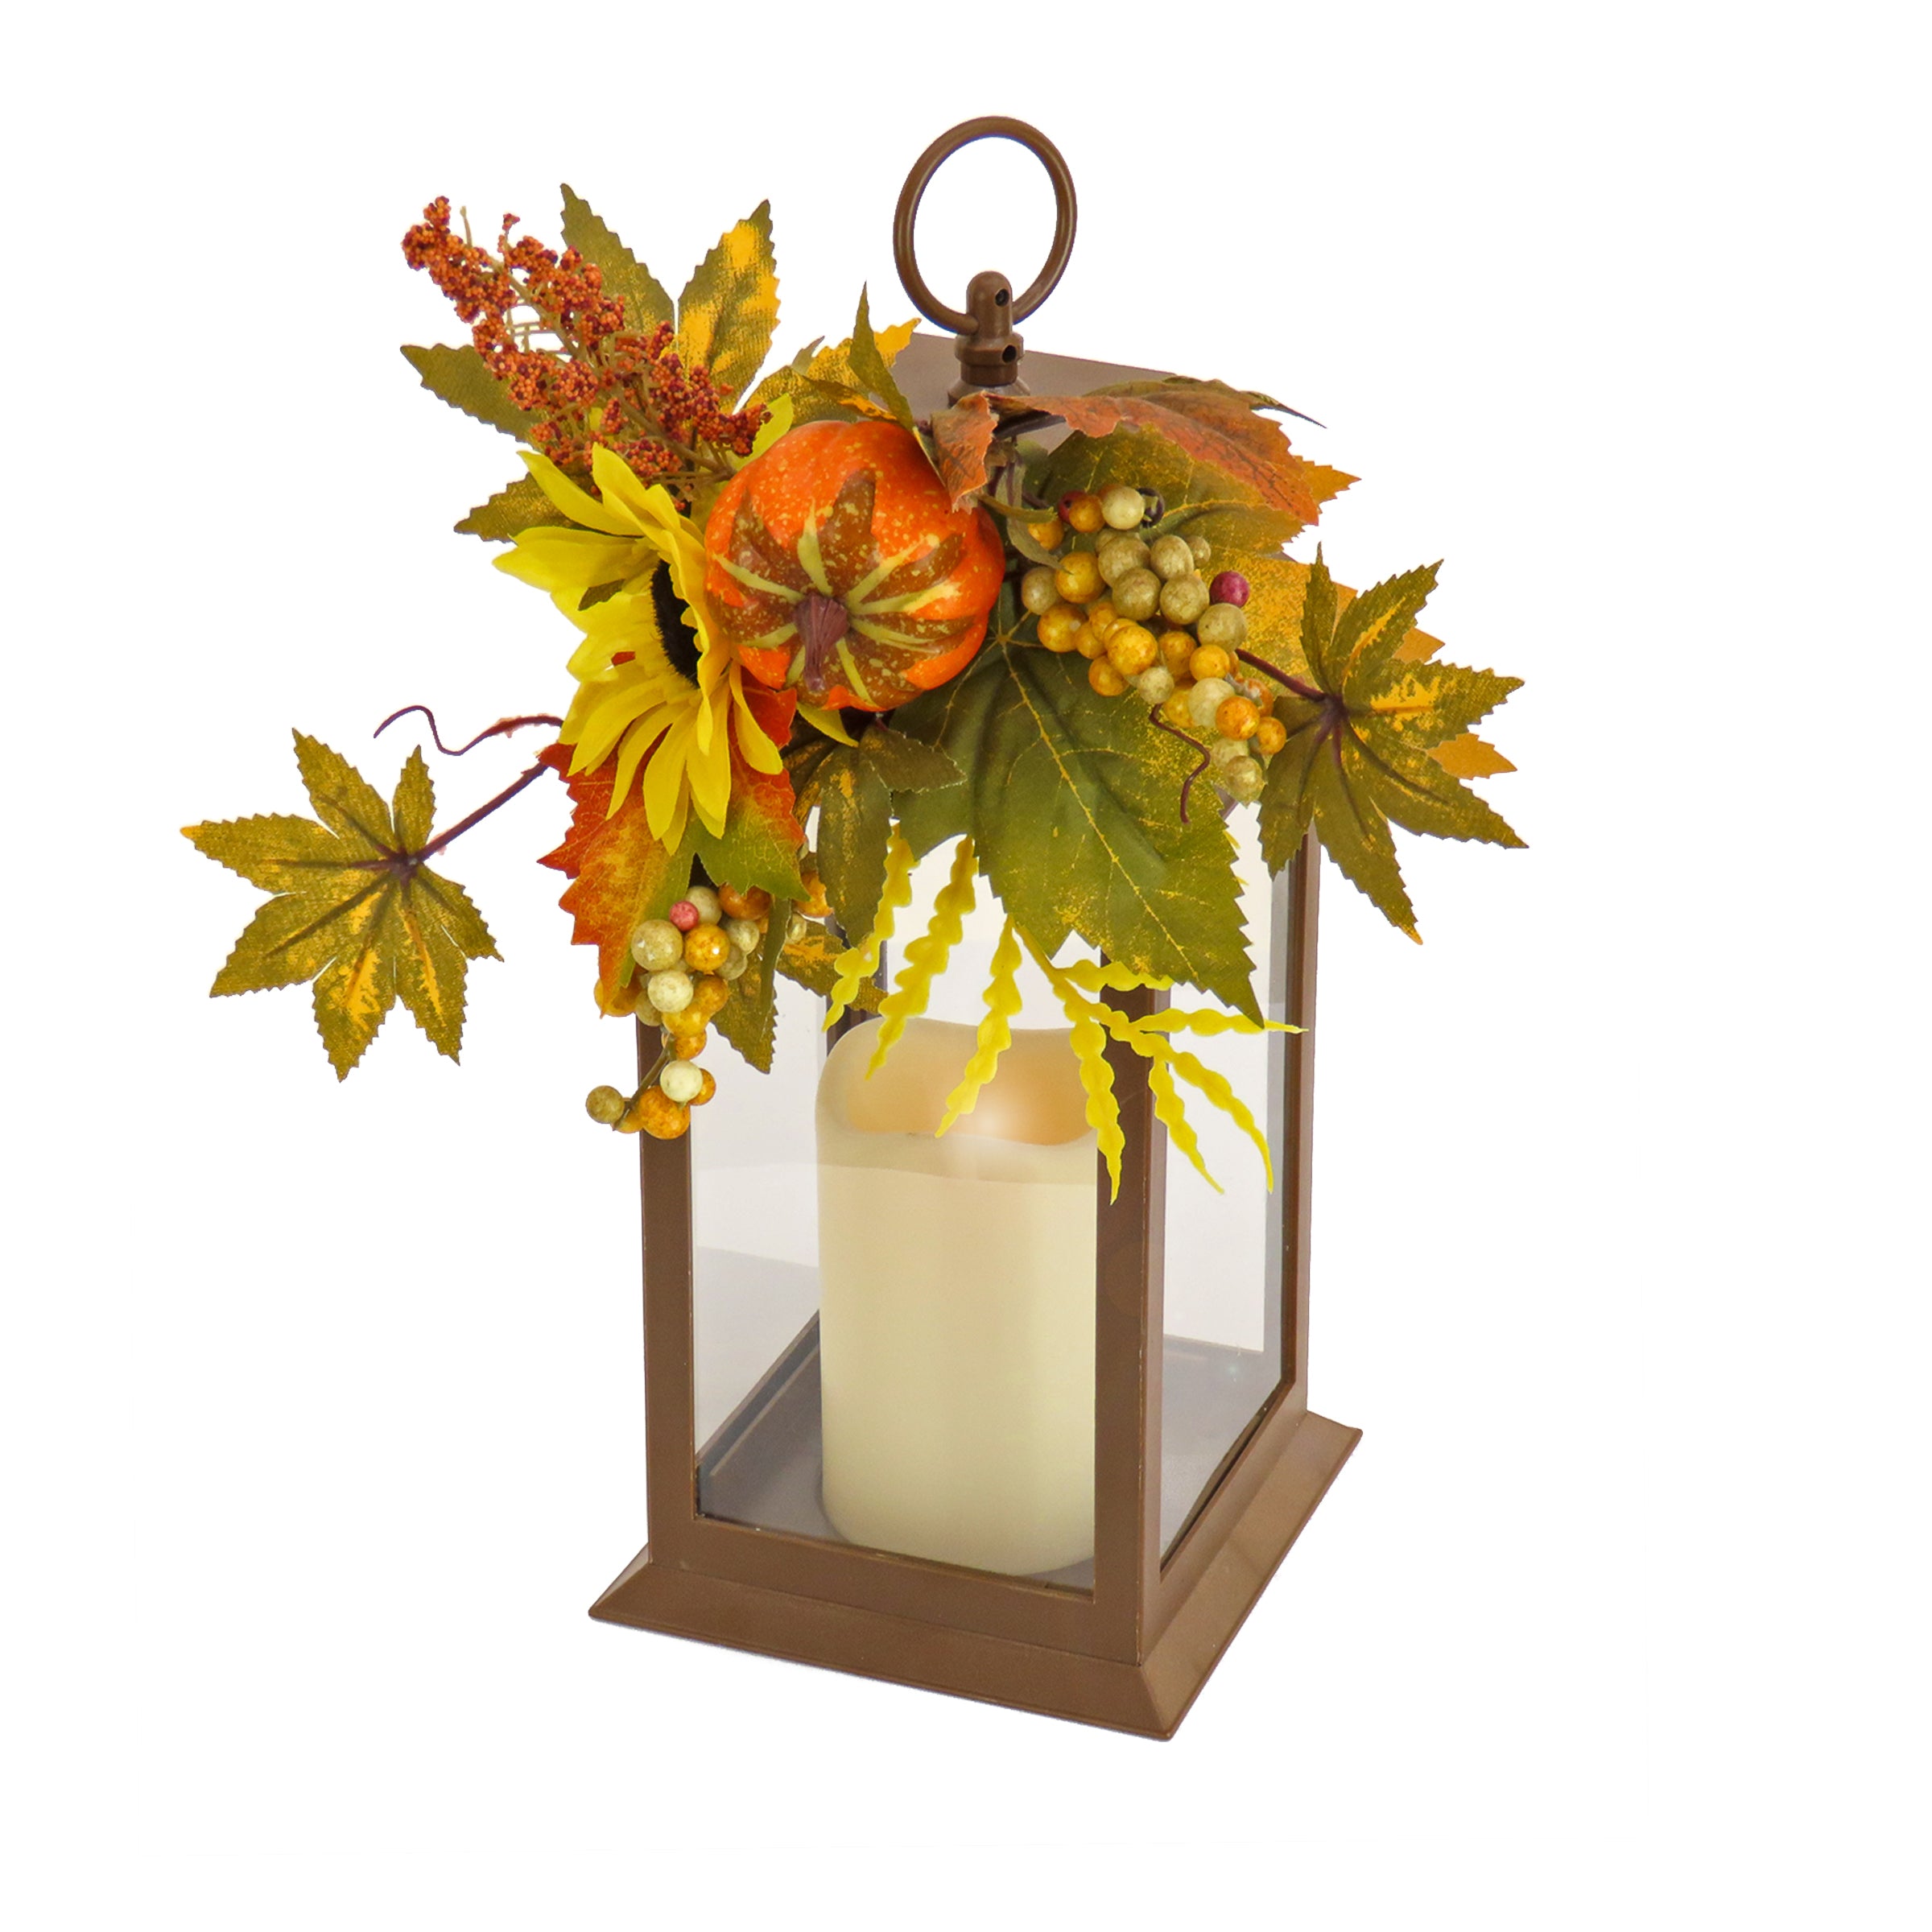 14"Harvest Harvest Lantern with Sunflower, Mixed Leaves, Berry & Pumpkin